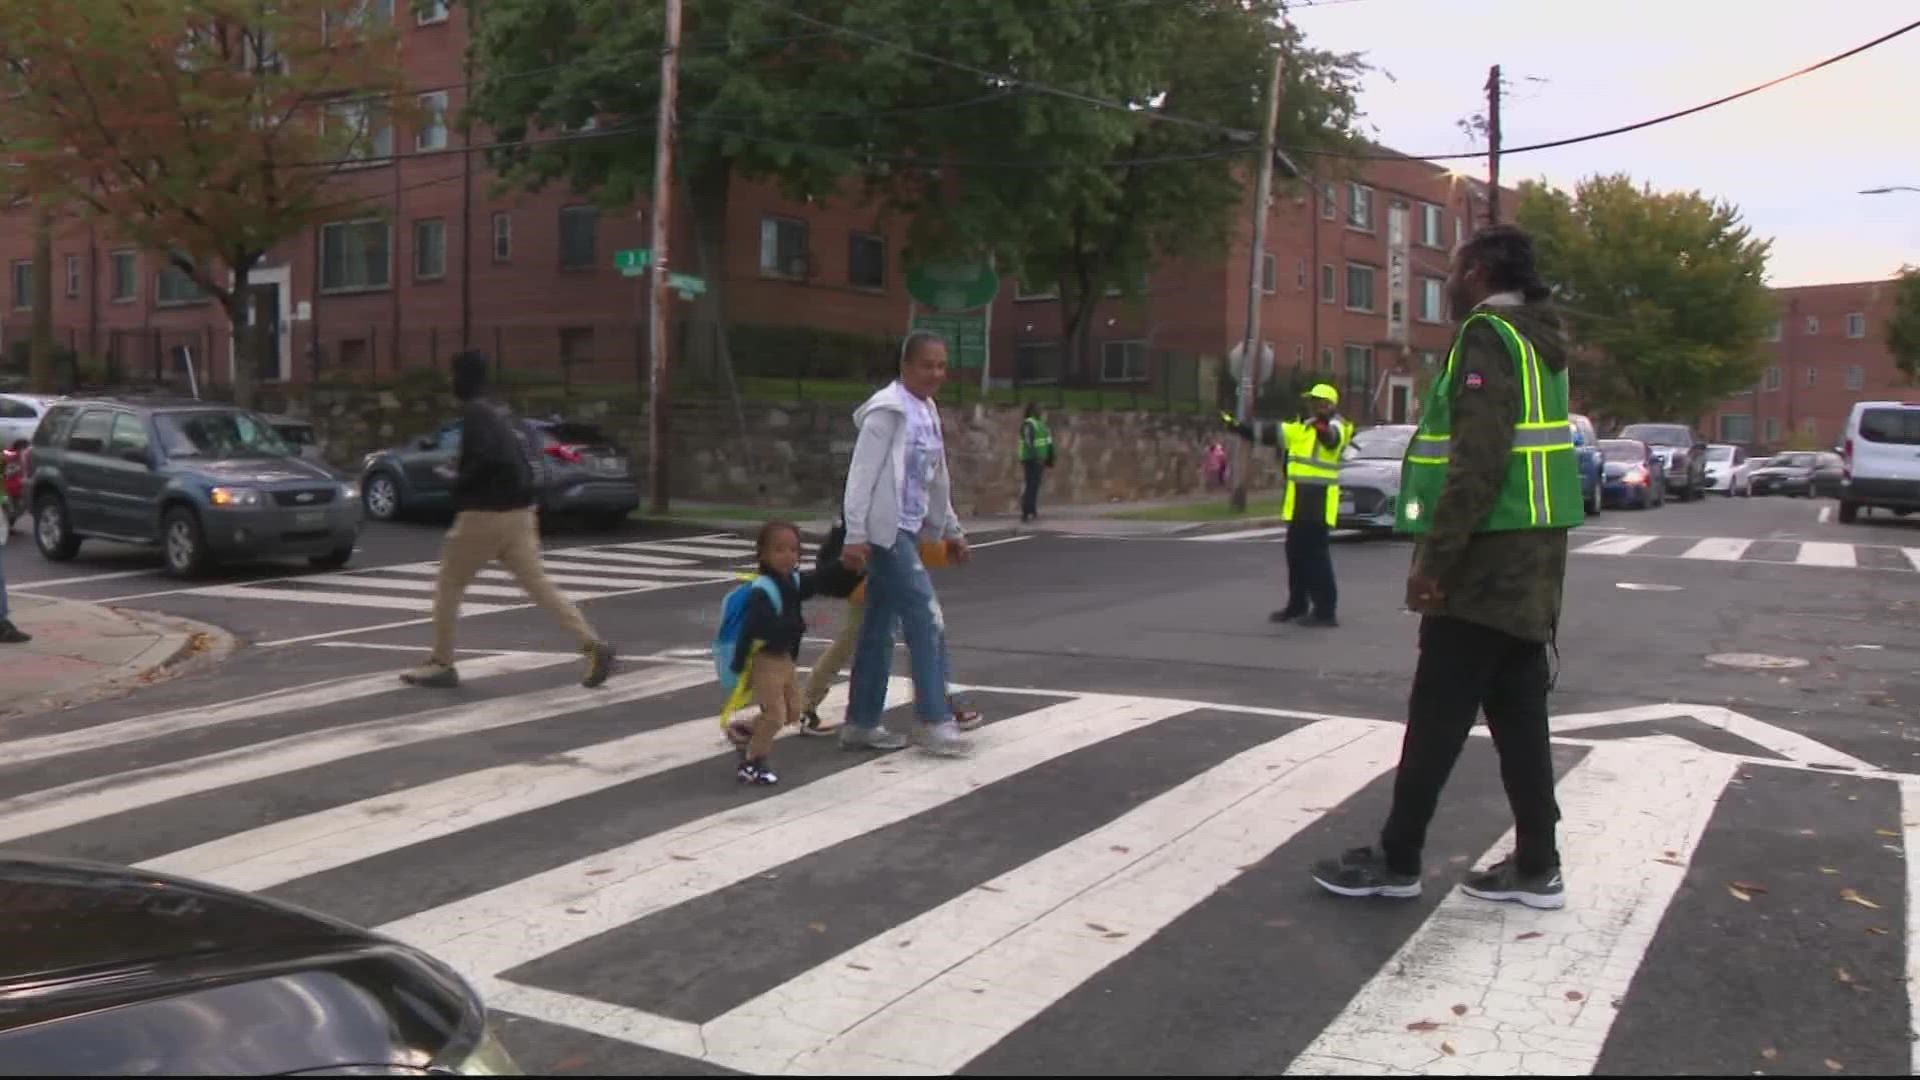 Safe Passage is a team of about 200 workers who stand in the intersection near schools in Washington D.C., to greet kids, get to know and keep them safe.